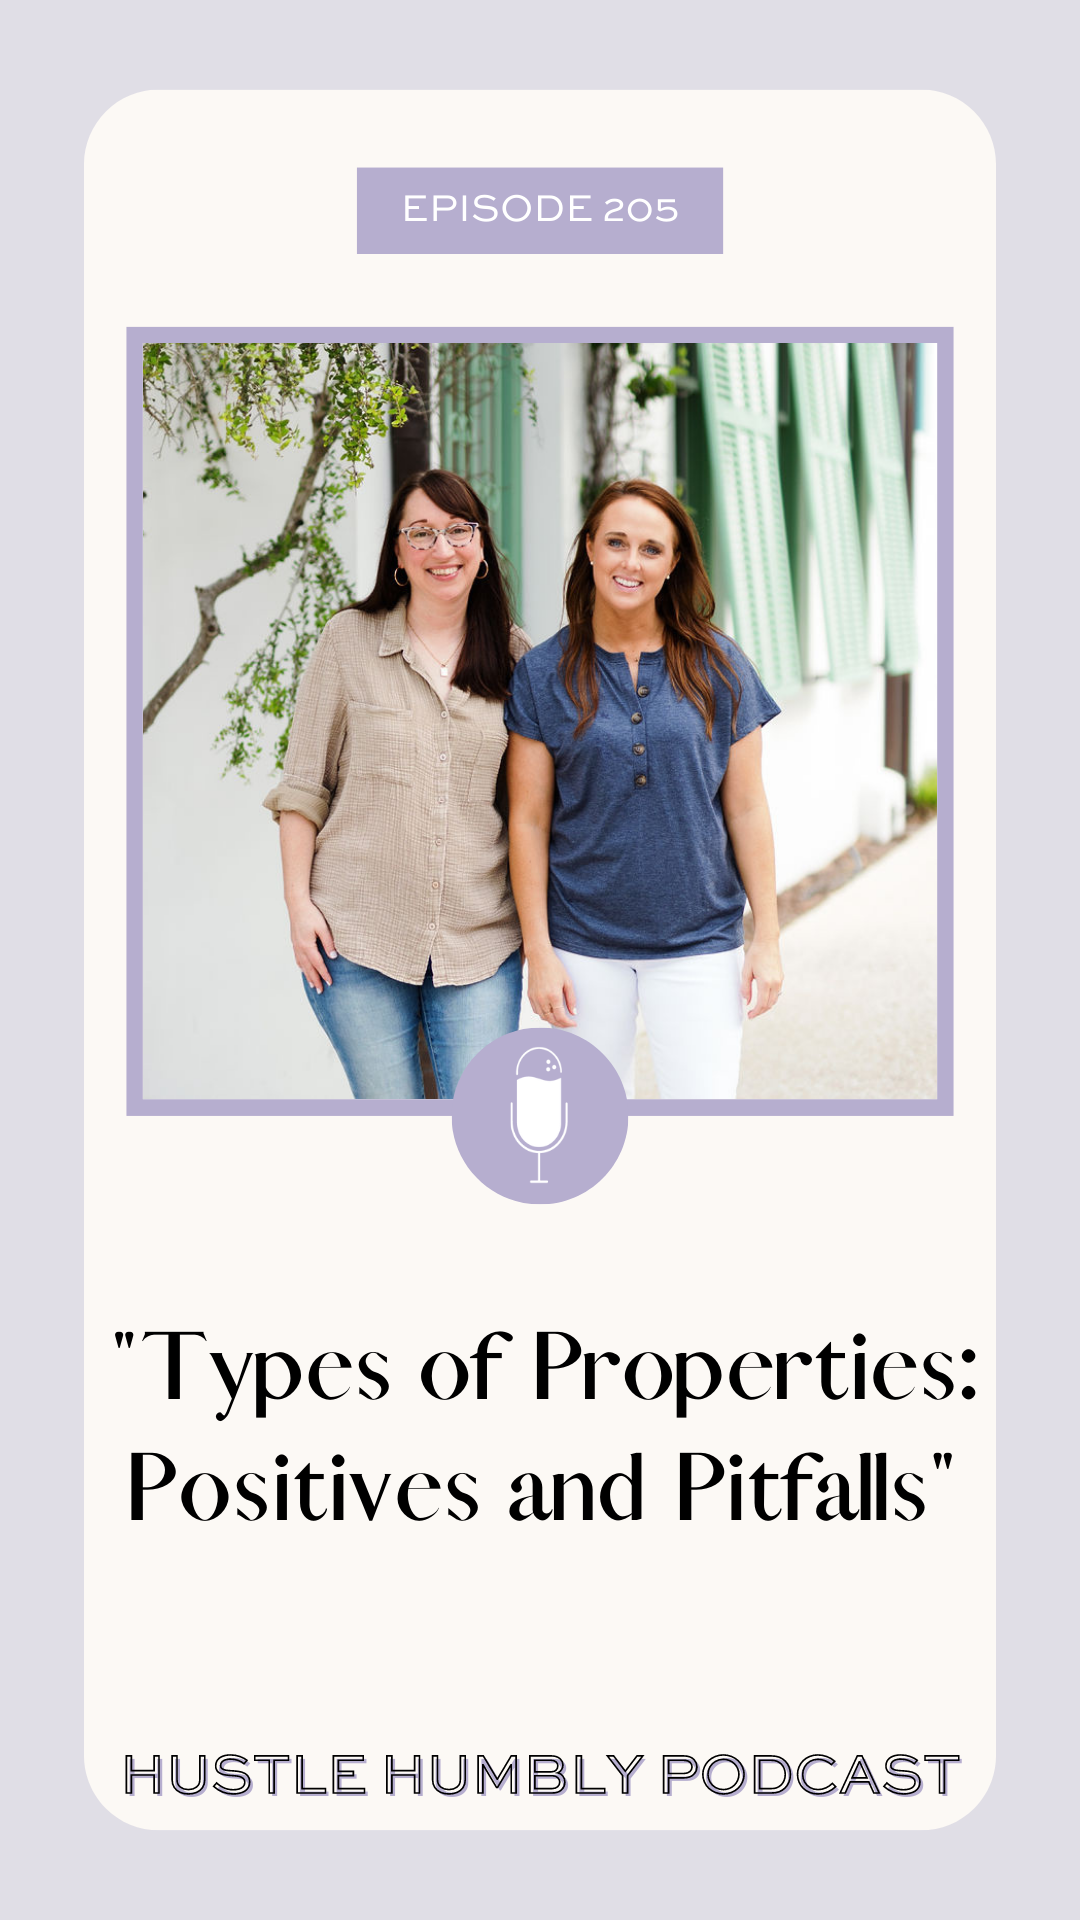 Hustle Humbly Podcast 205: Types of Properties: Positives and Pitfalls